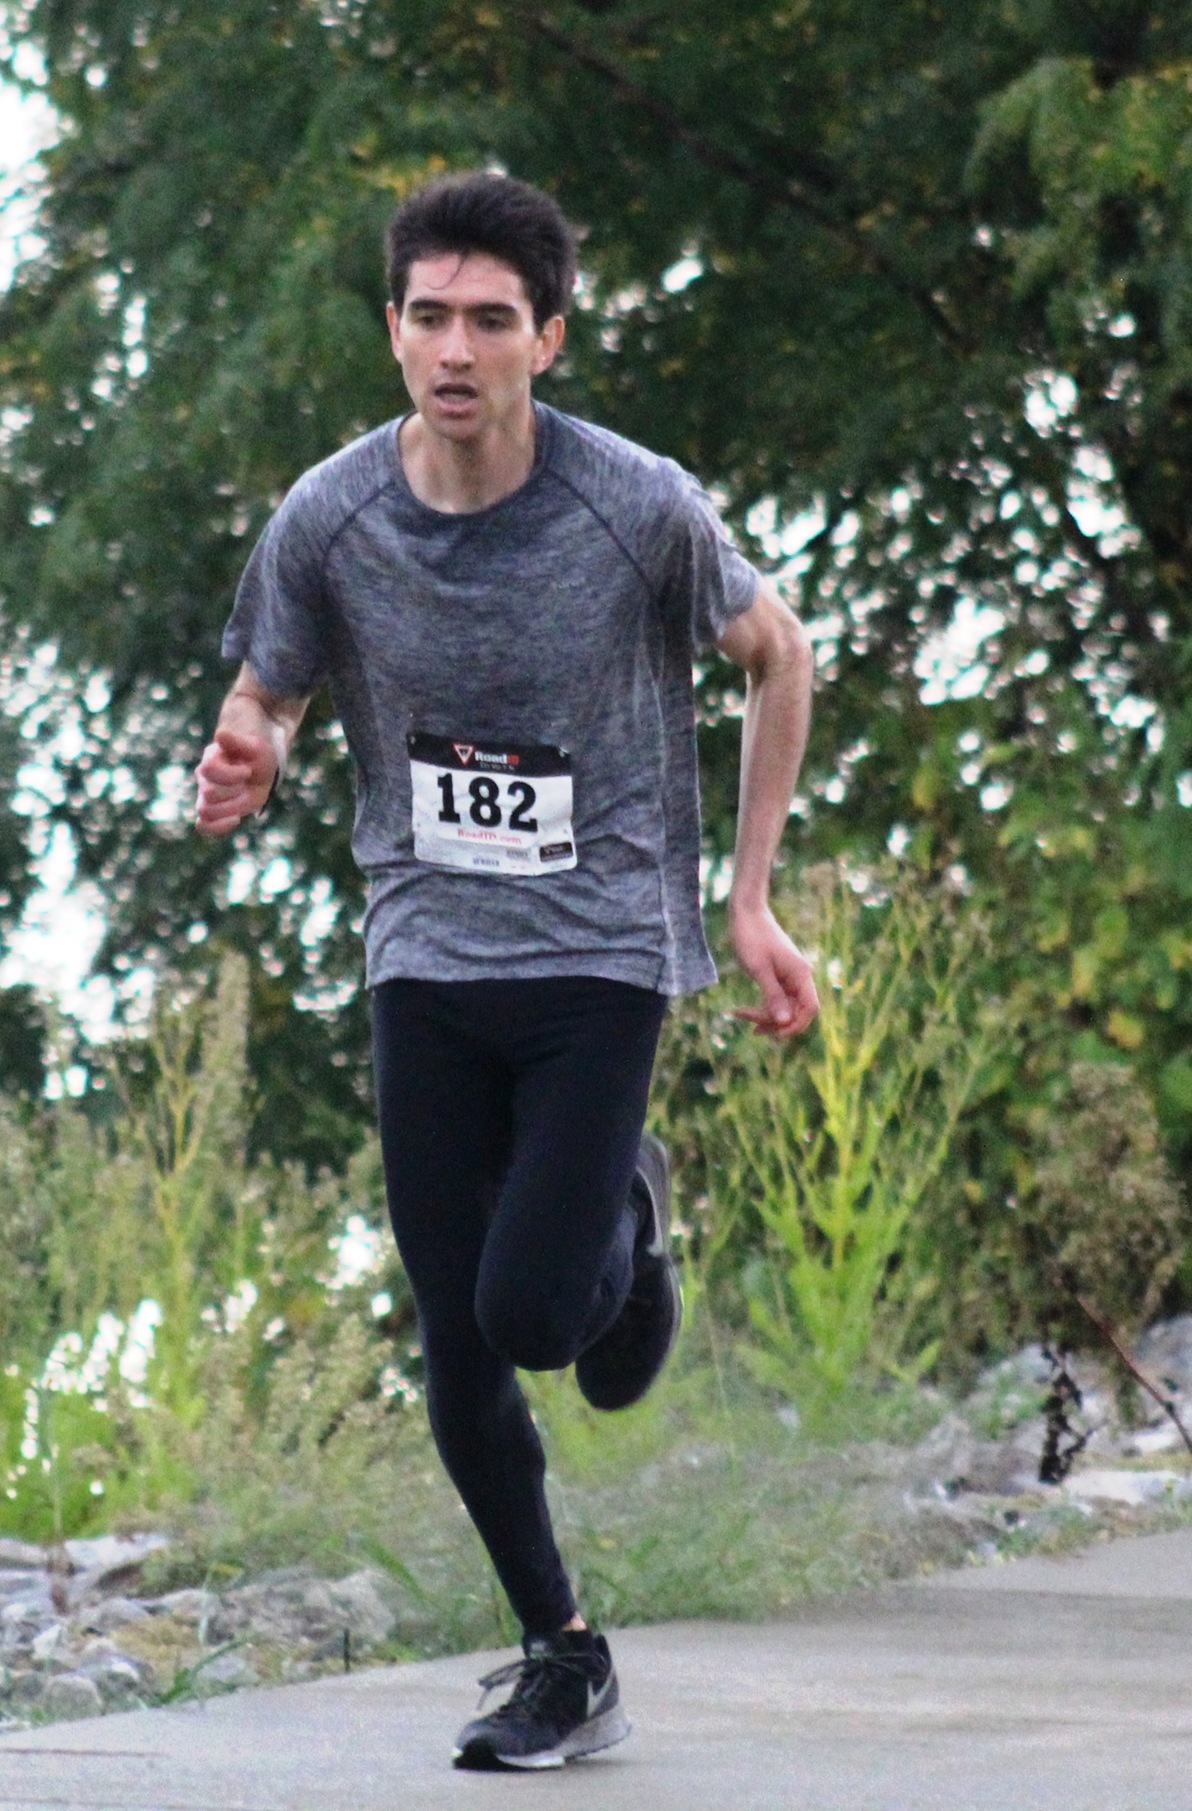 Leonardo Figueiras runs to a first-place finish in the Robert's Run four-mile run on Saturday.